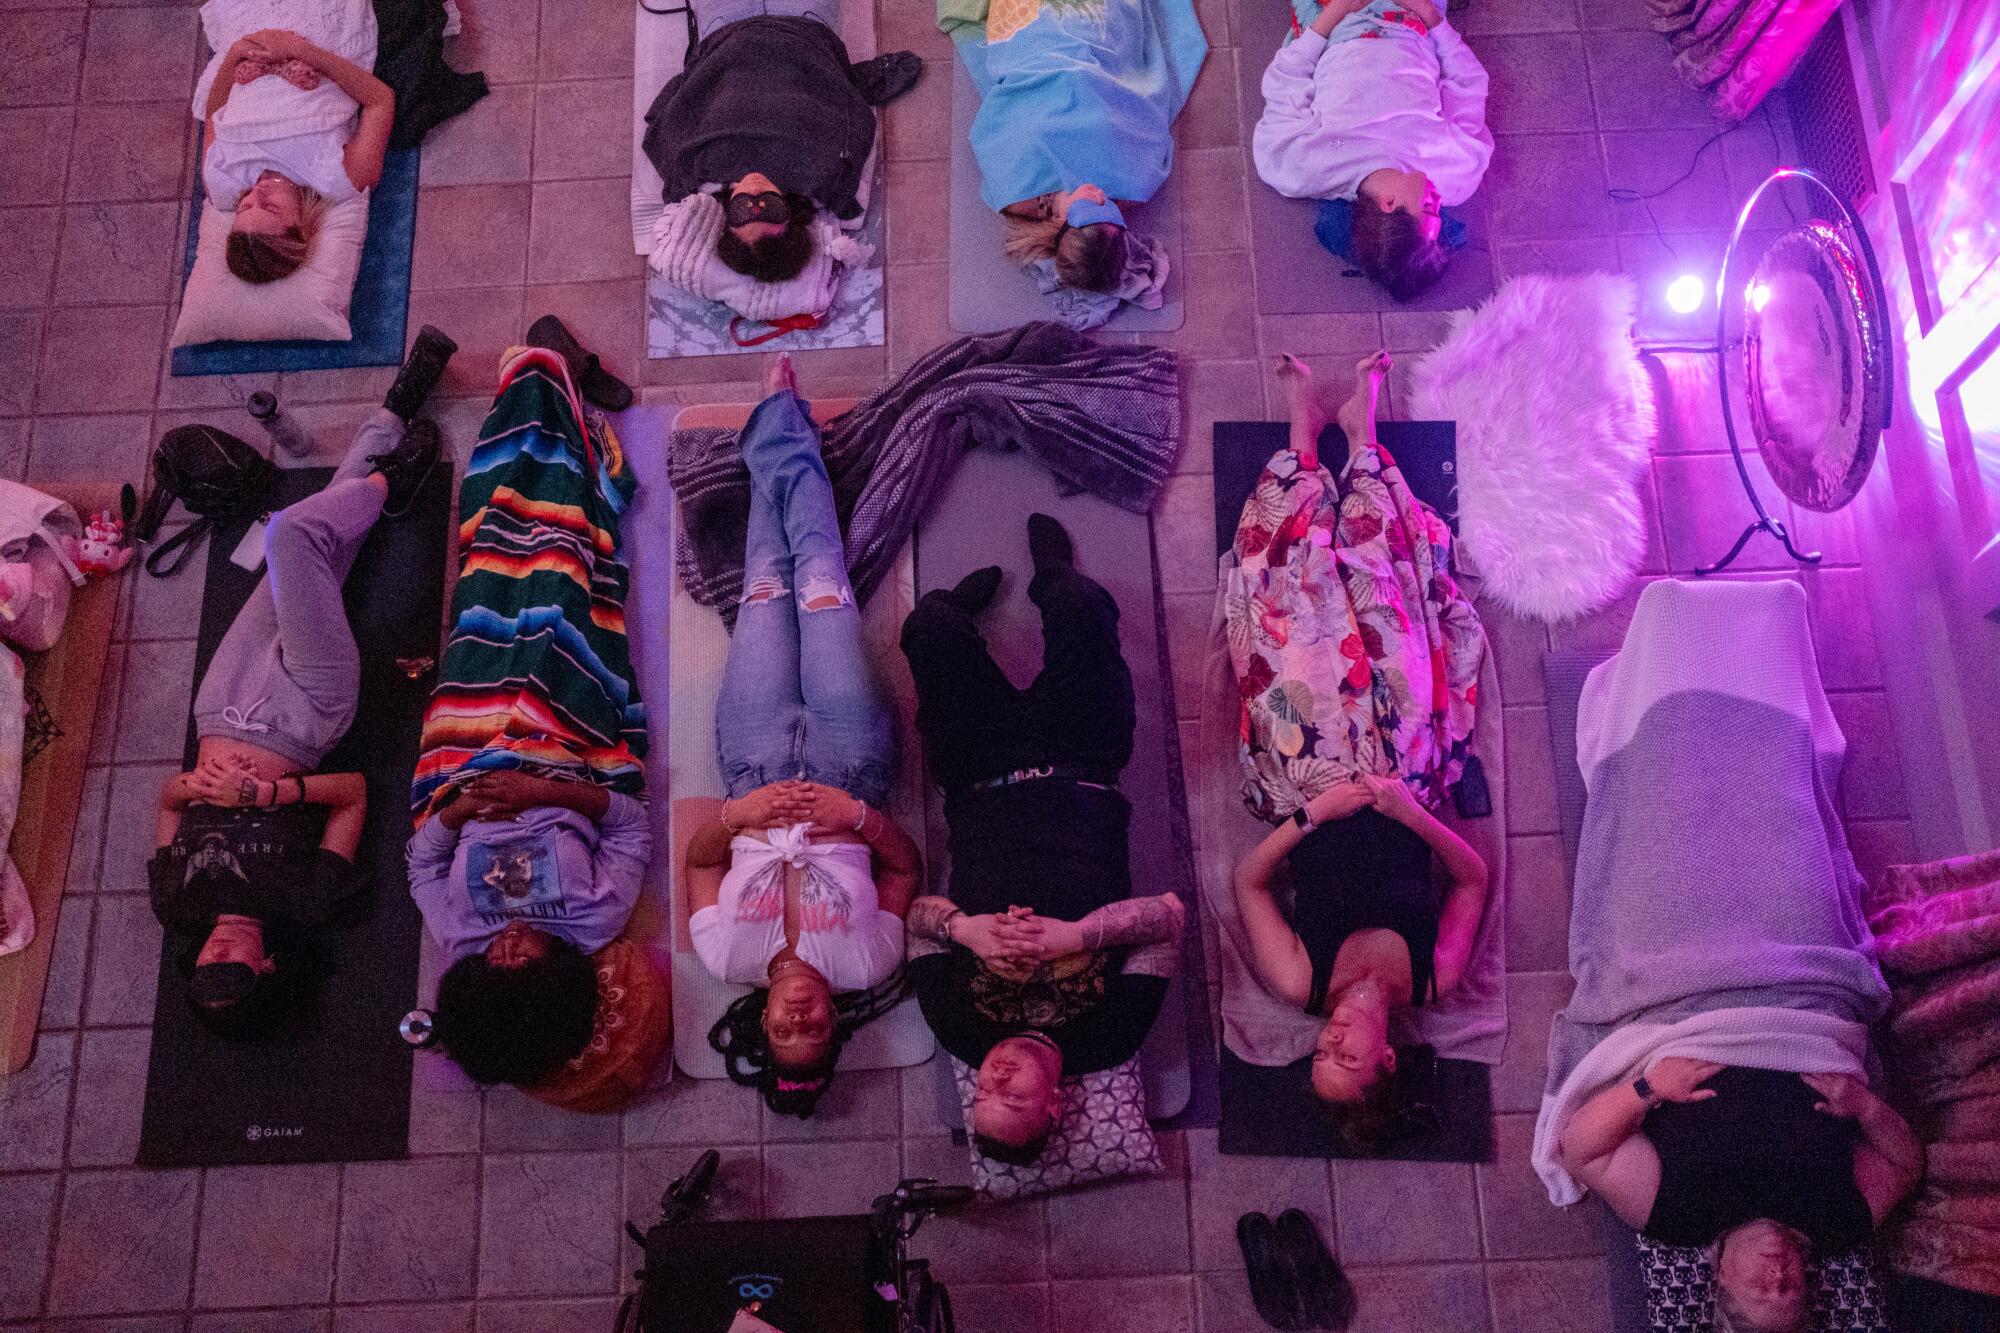 Guests lie on the floor as they relax during a sound bath event at the First Congregational Church of Los Angeles.